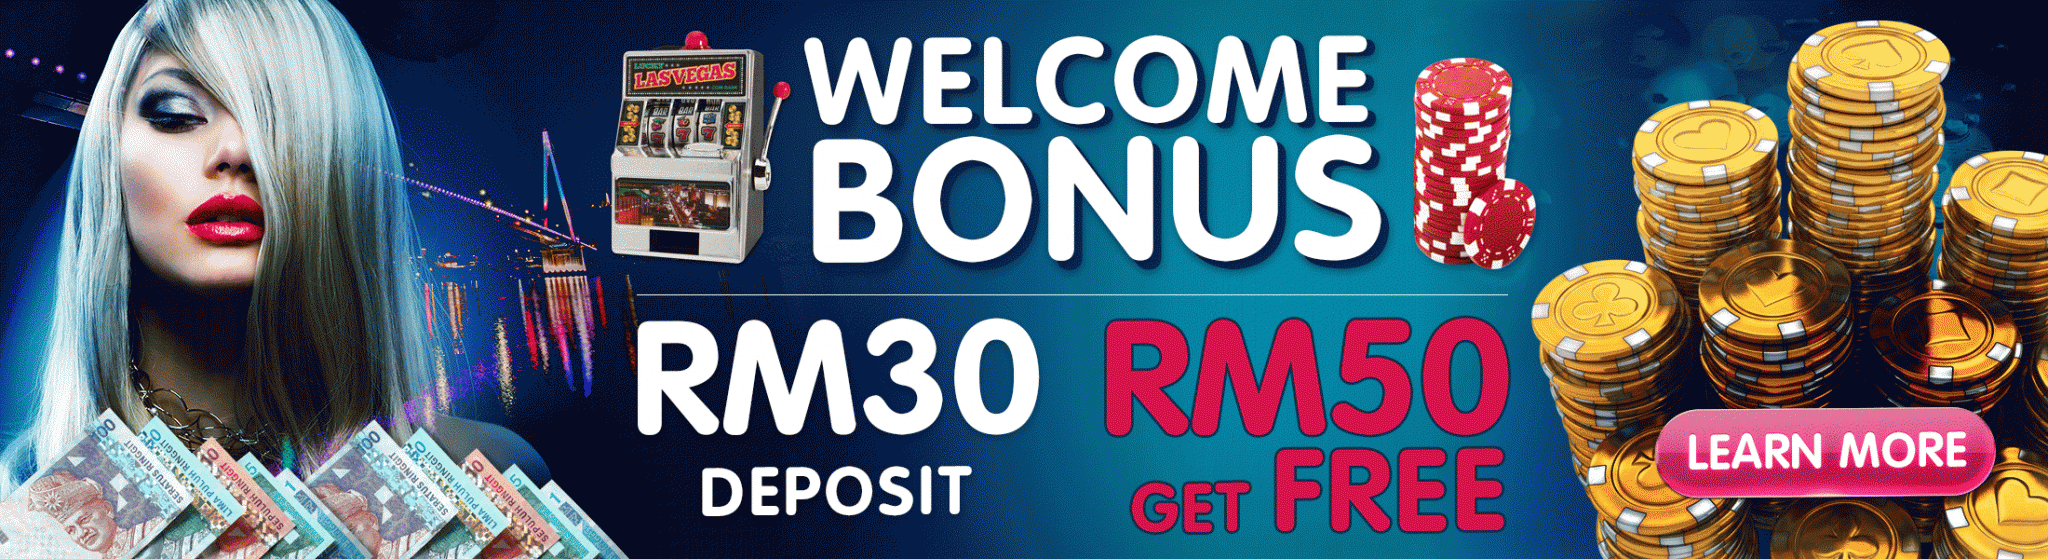 918Kiss(SCR888) Give Slot Game Welcome Bonus Monthly Deposit RM 30 Free RM 50